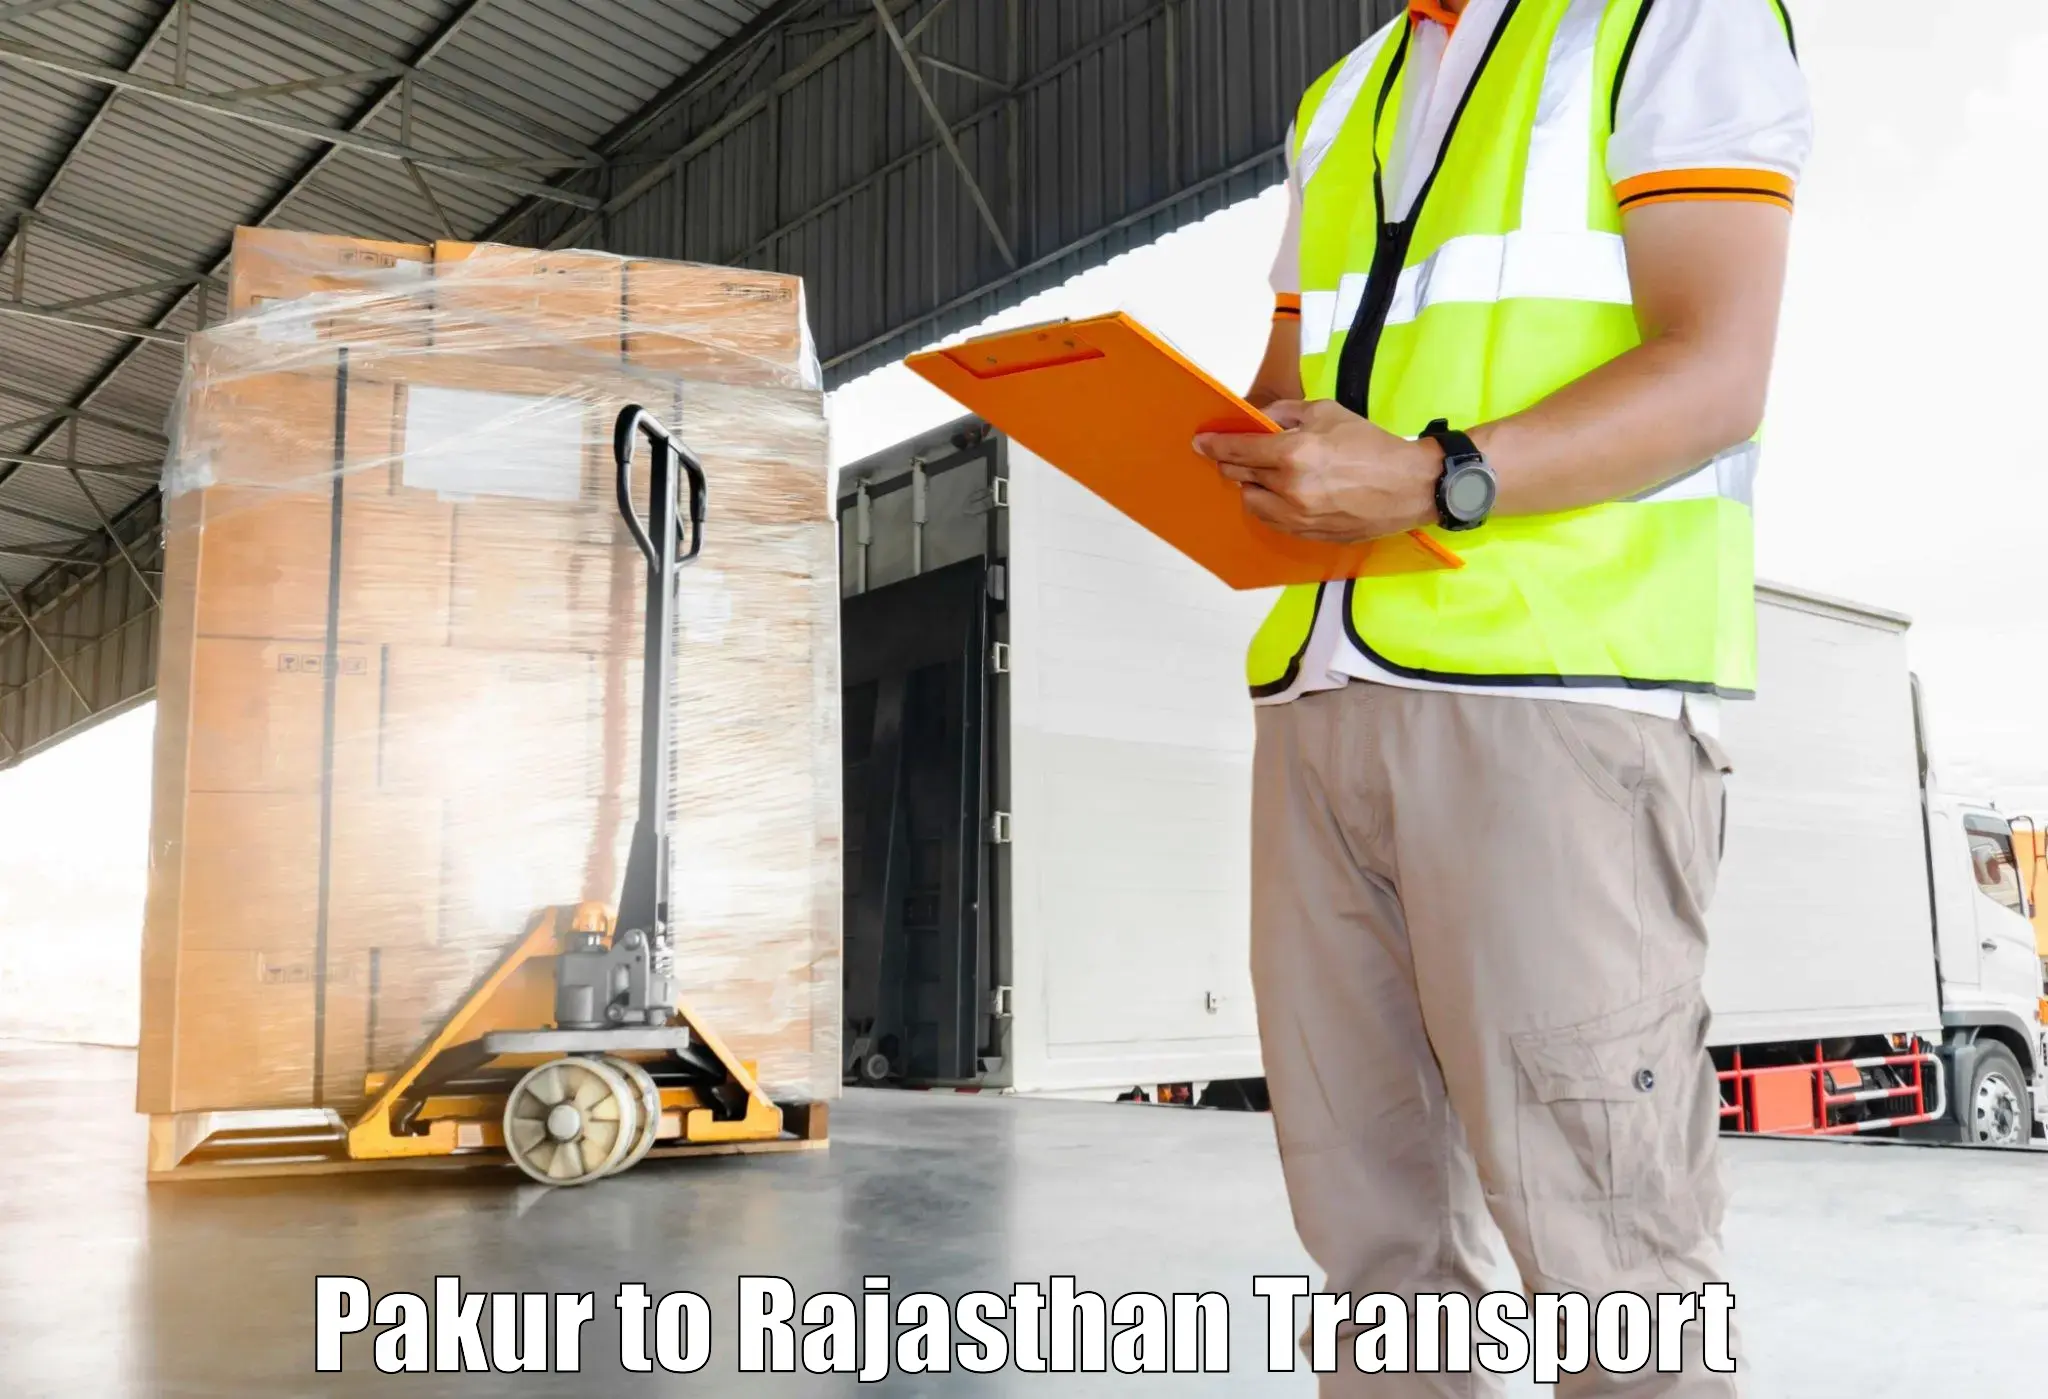 Domestic goods transportation services Pakur to Mathania